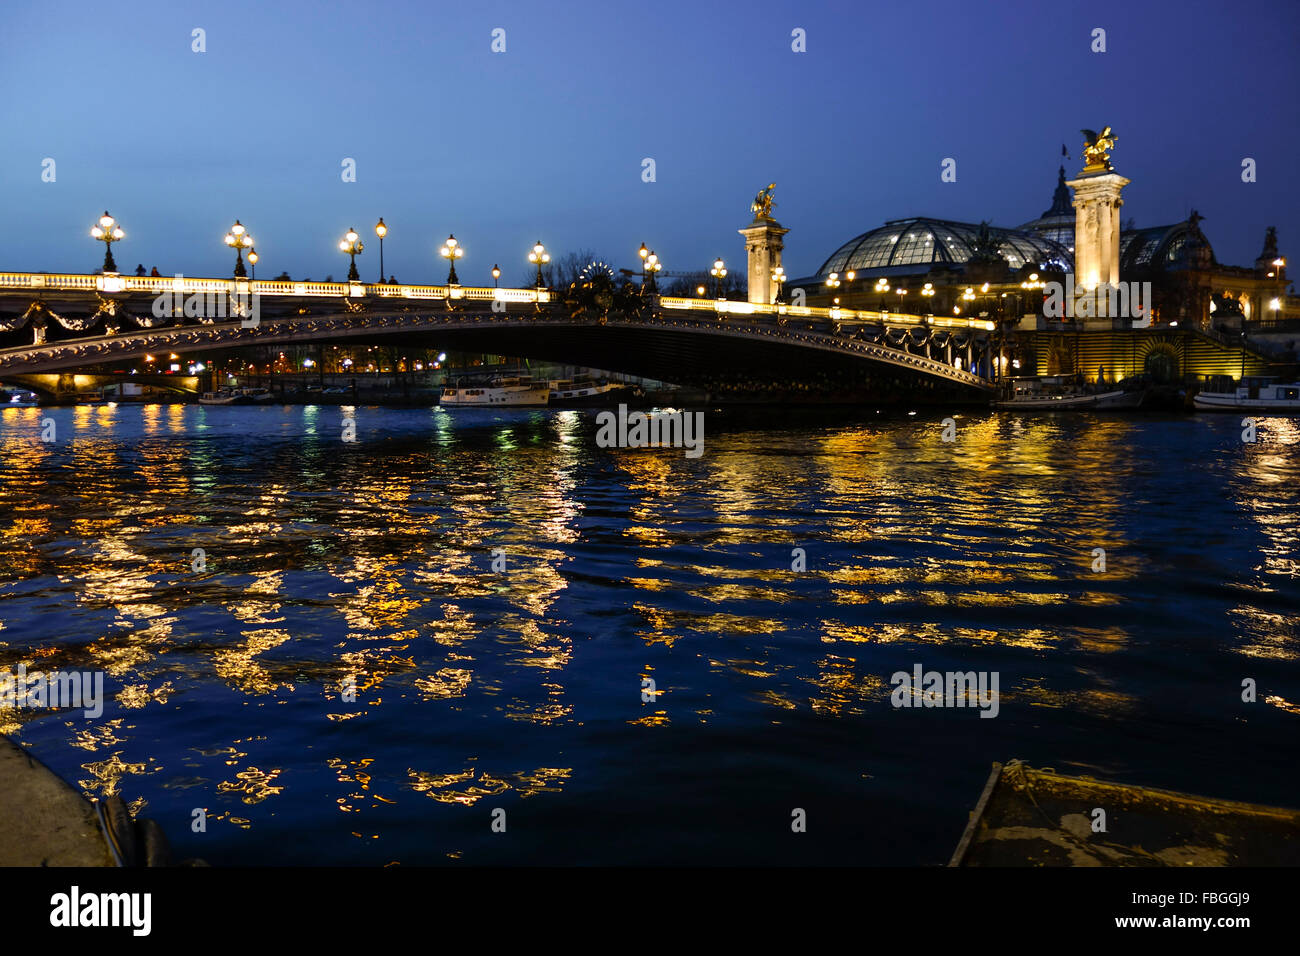 The Pont Alexandre III, arch bridge in Paris at night, Grand Palais behind, France. Stock Photo